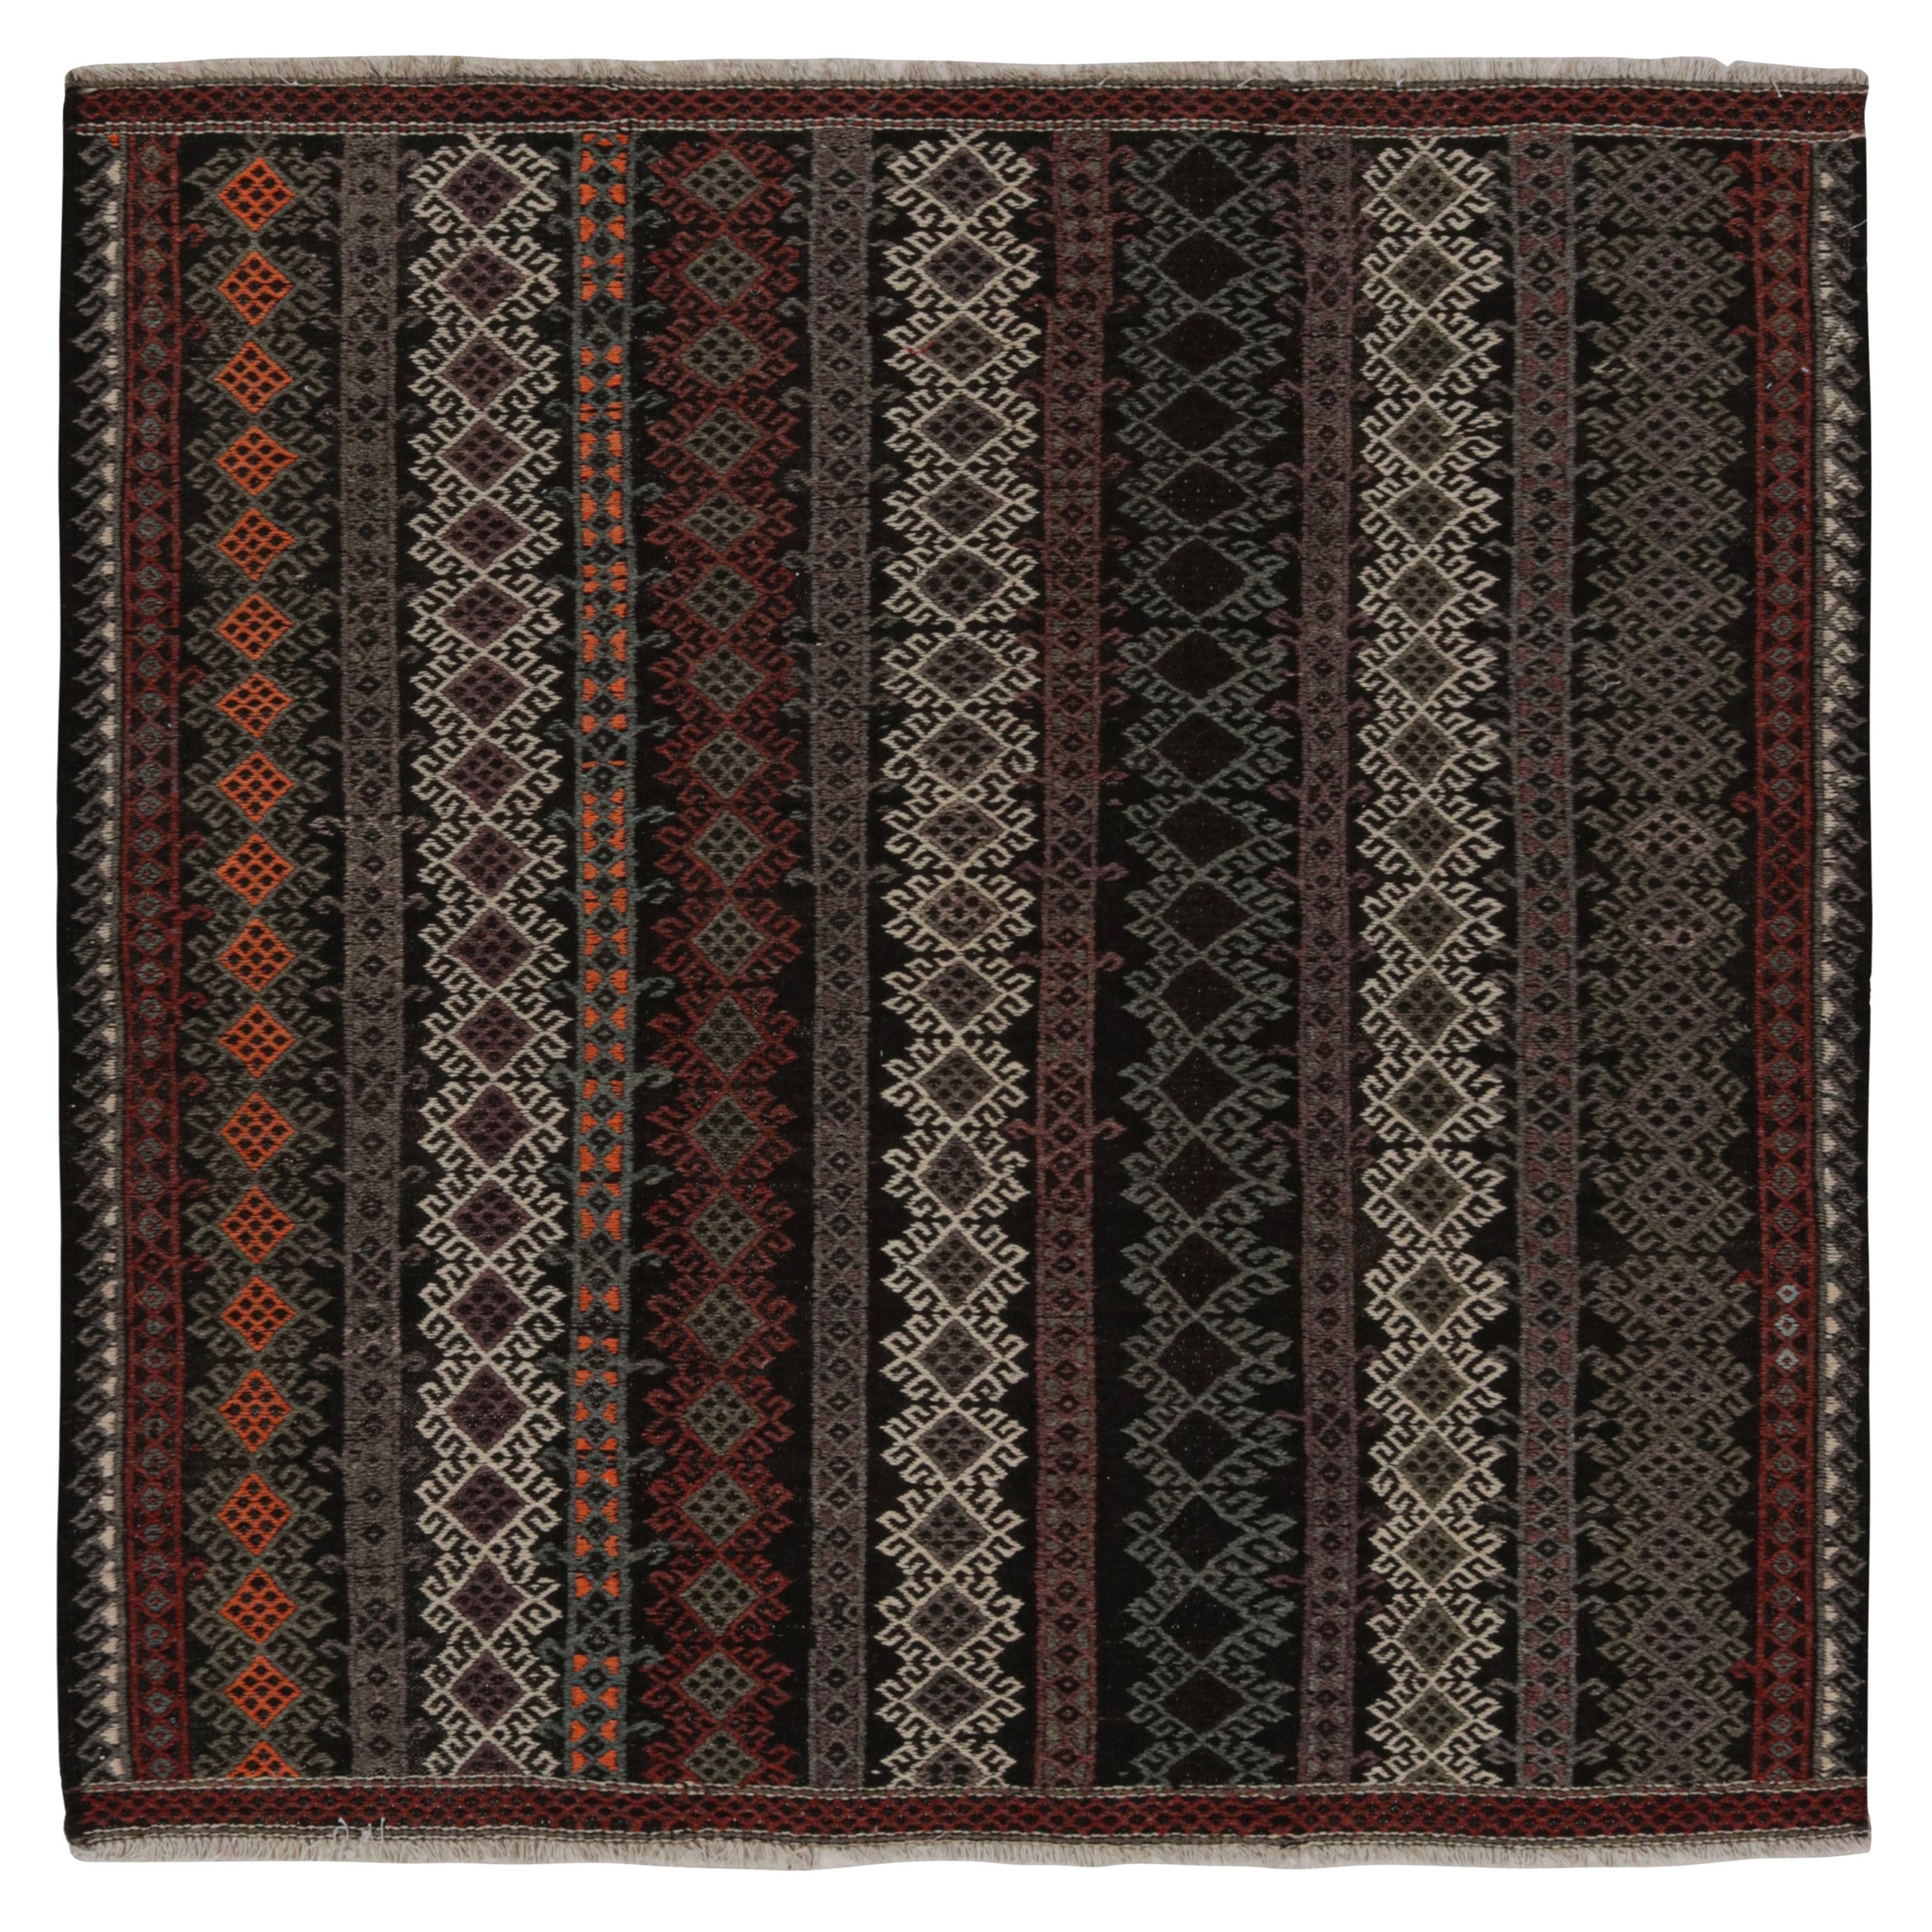 Vintage Turkish Square Rug, with Geometric Patterns, from Rug & Kilim For Sale